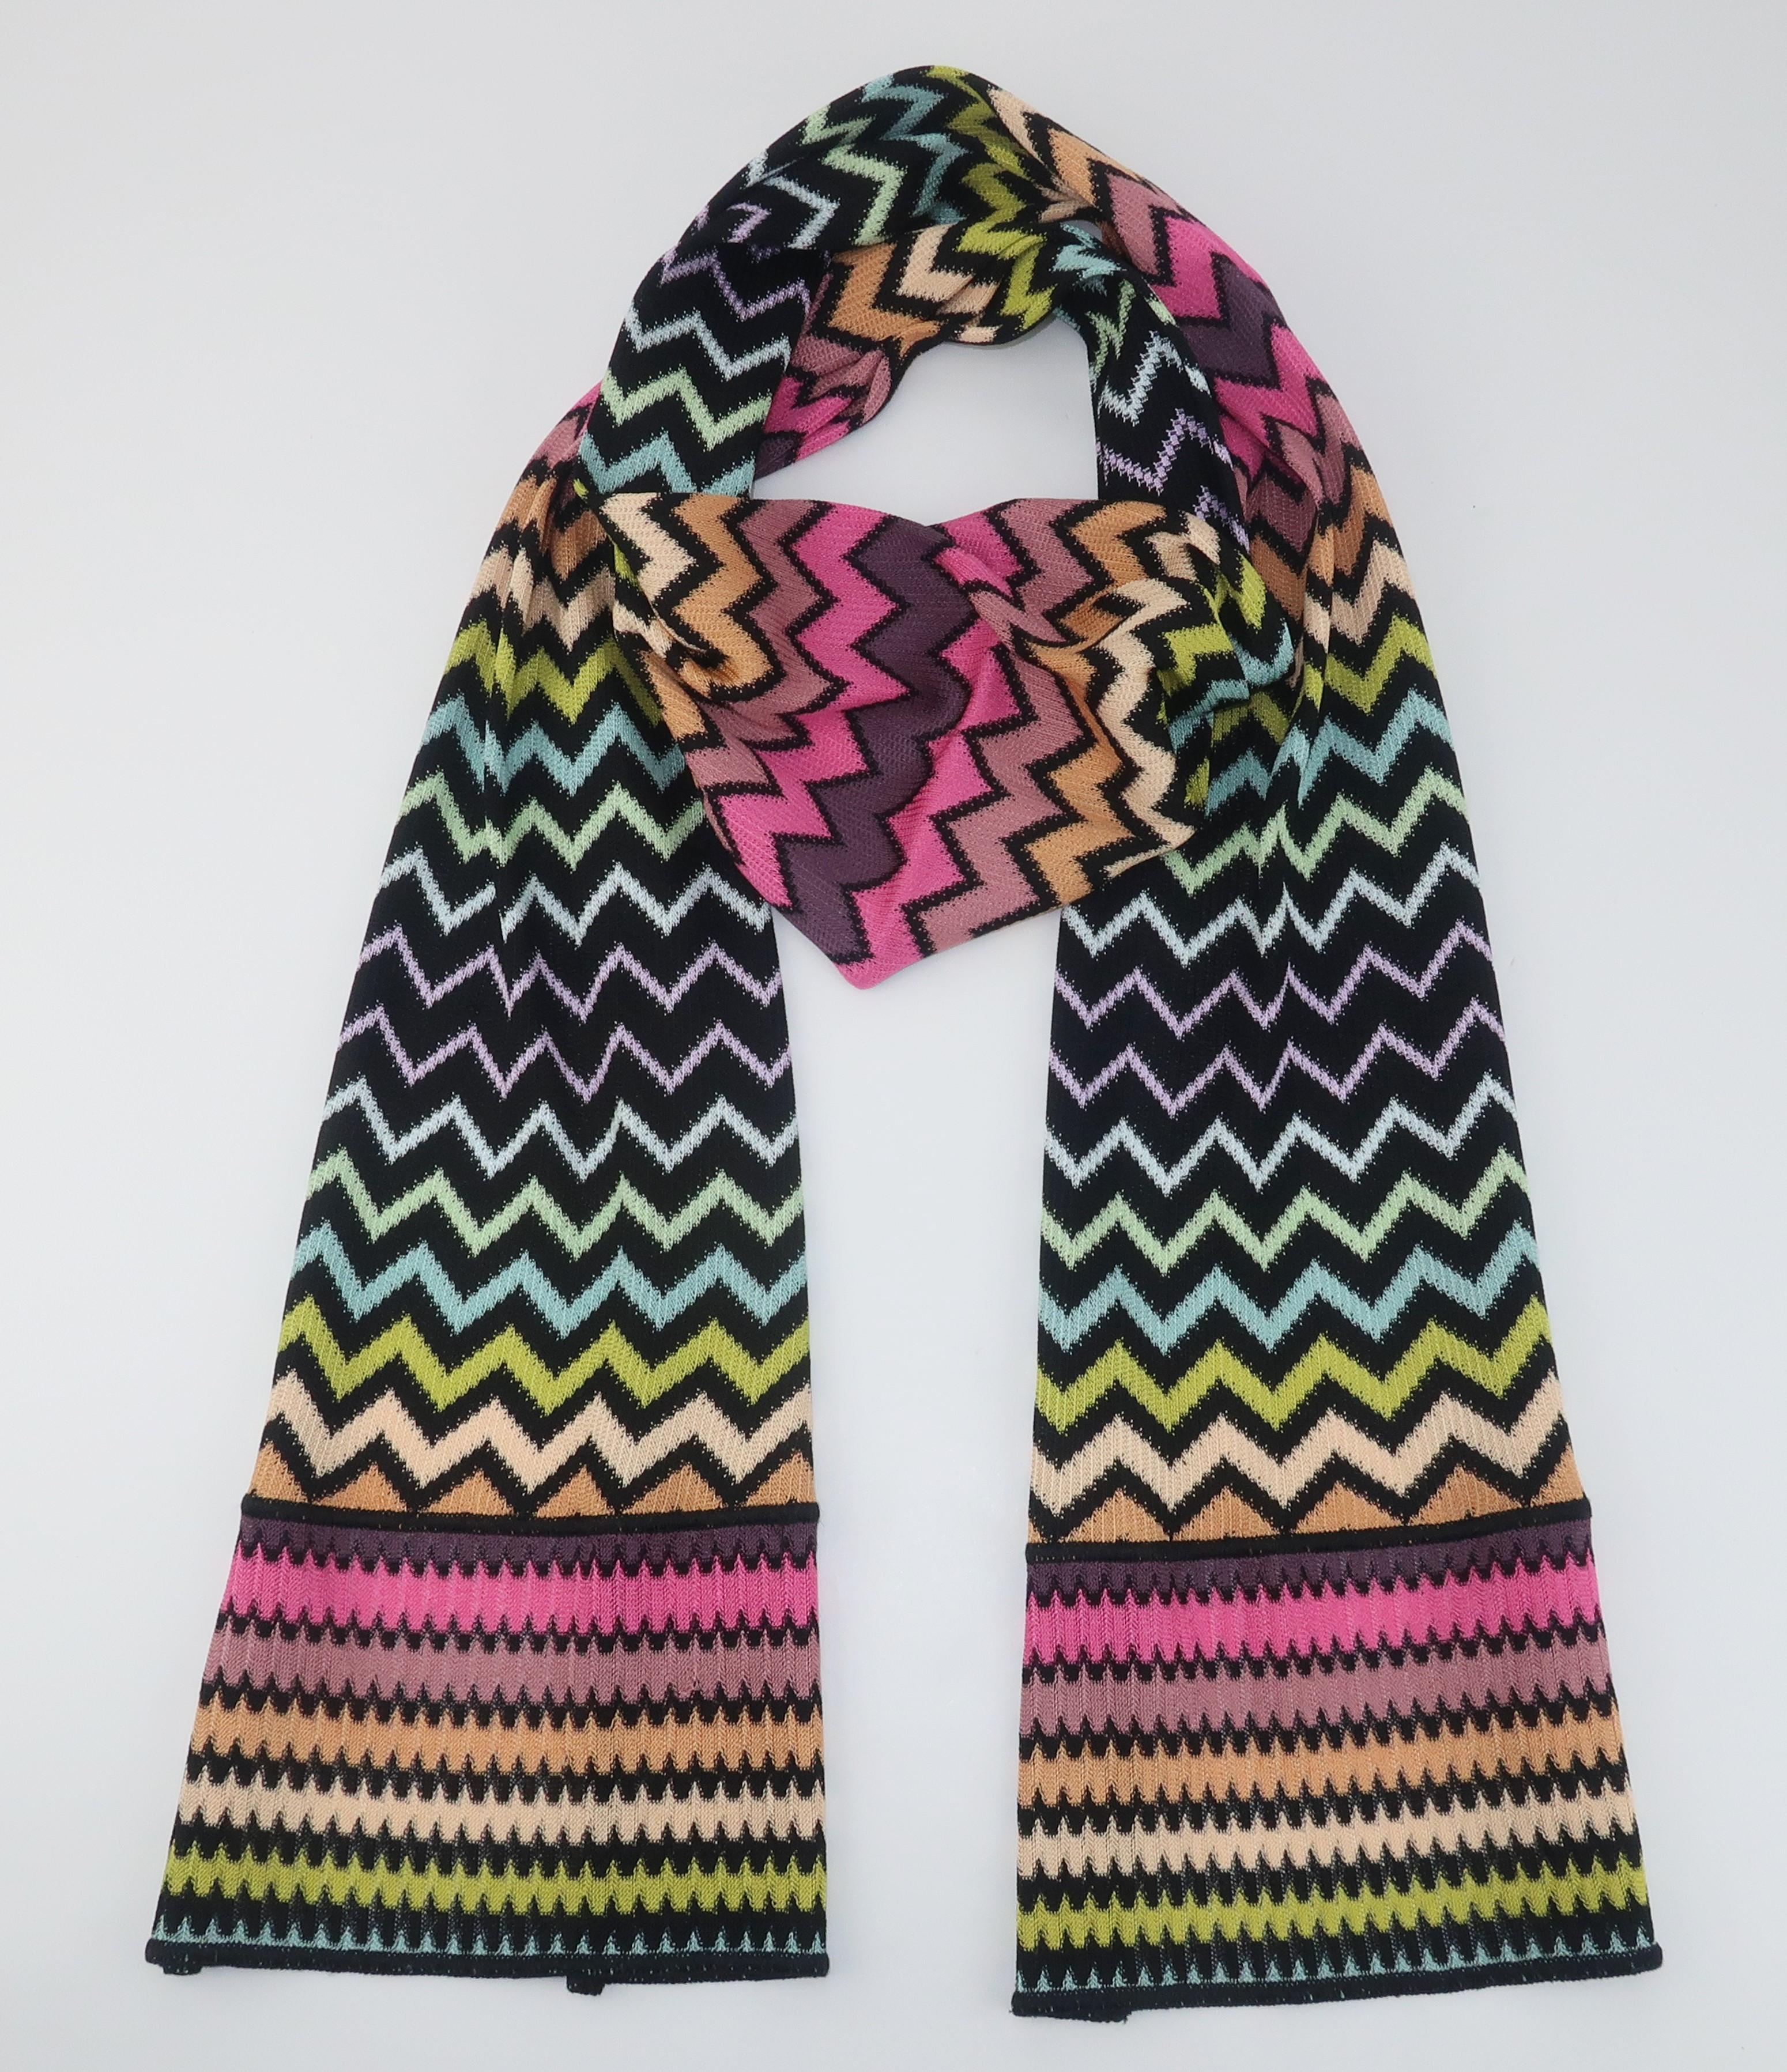 Missoni long knit scarf with the fashion brands iconic flame stitch design displaying shades ranging from peach to mauve, green, blue and hot pink all outlined in black.  Easy to drape and wear with everything from basic black to a Missoni jacket as